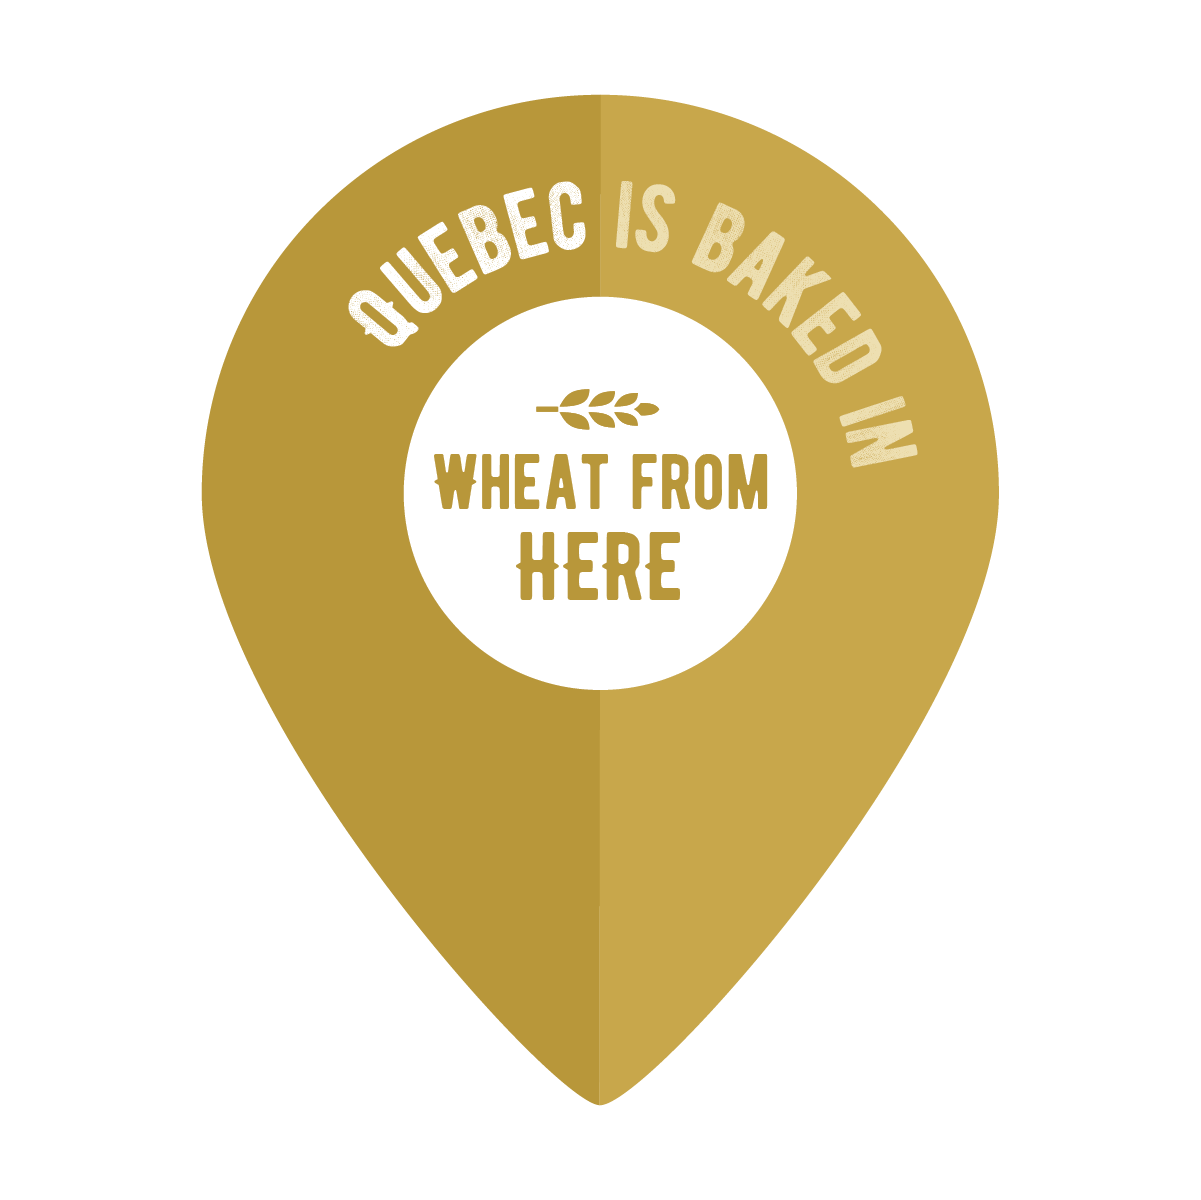 Wheat from here